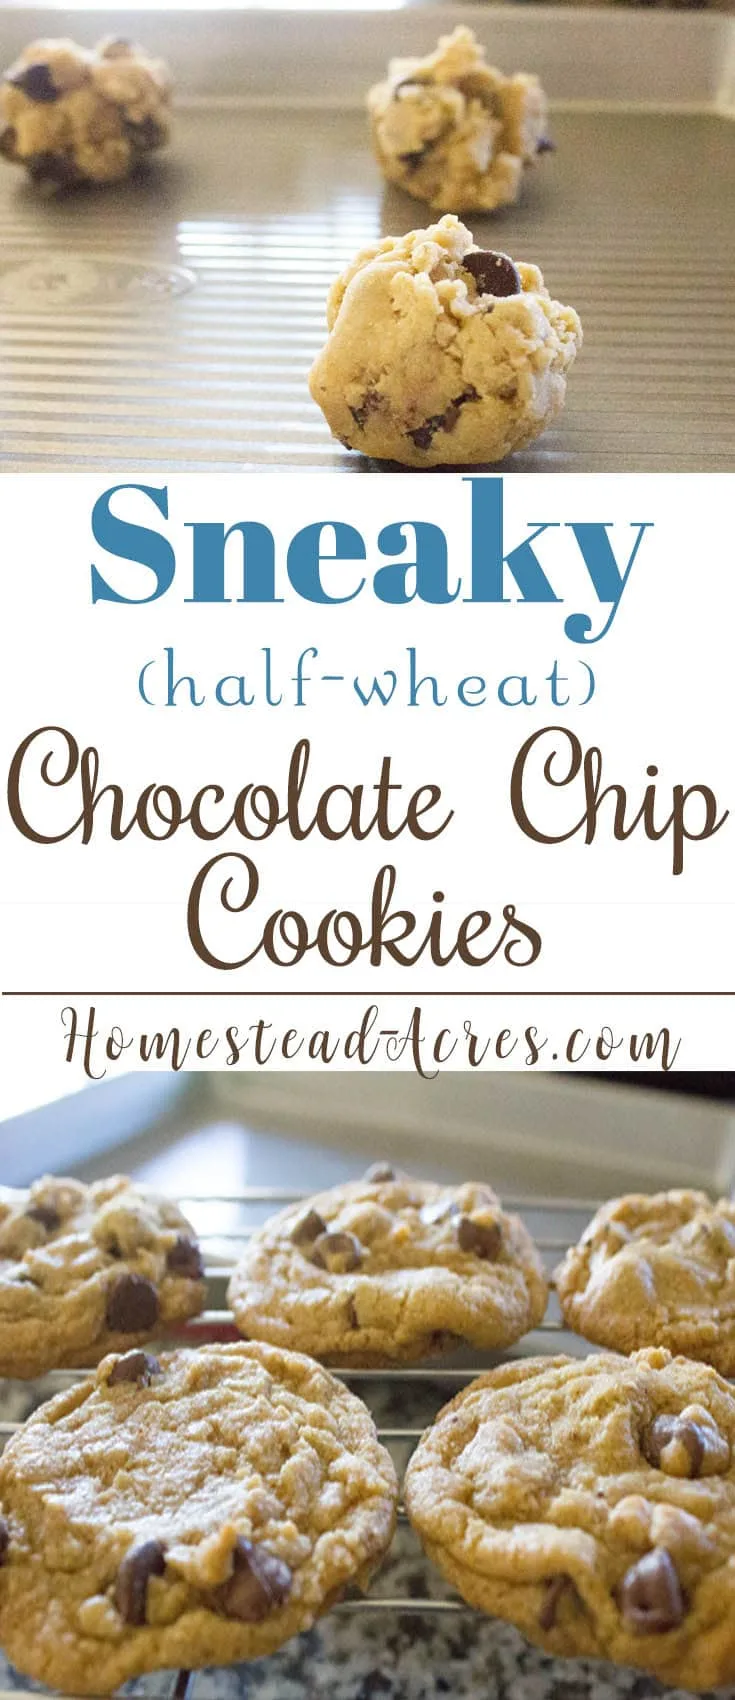 Perfectly Sneaky Chocolate Chip Cookies. Enjoy a healthier chocolate chip cookie with this recipe using half whole wheat flour. So yummy, knowone will ever know! www.homestead-acres.com